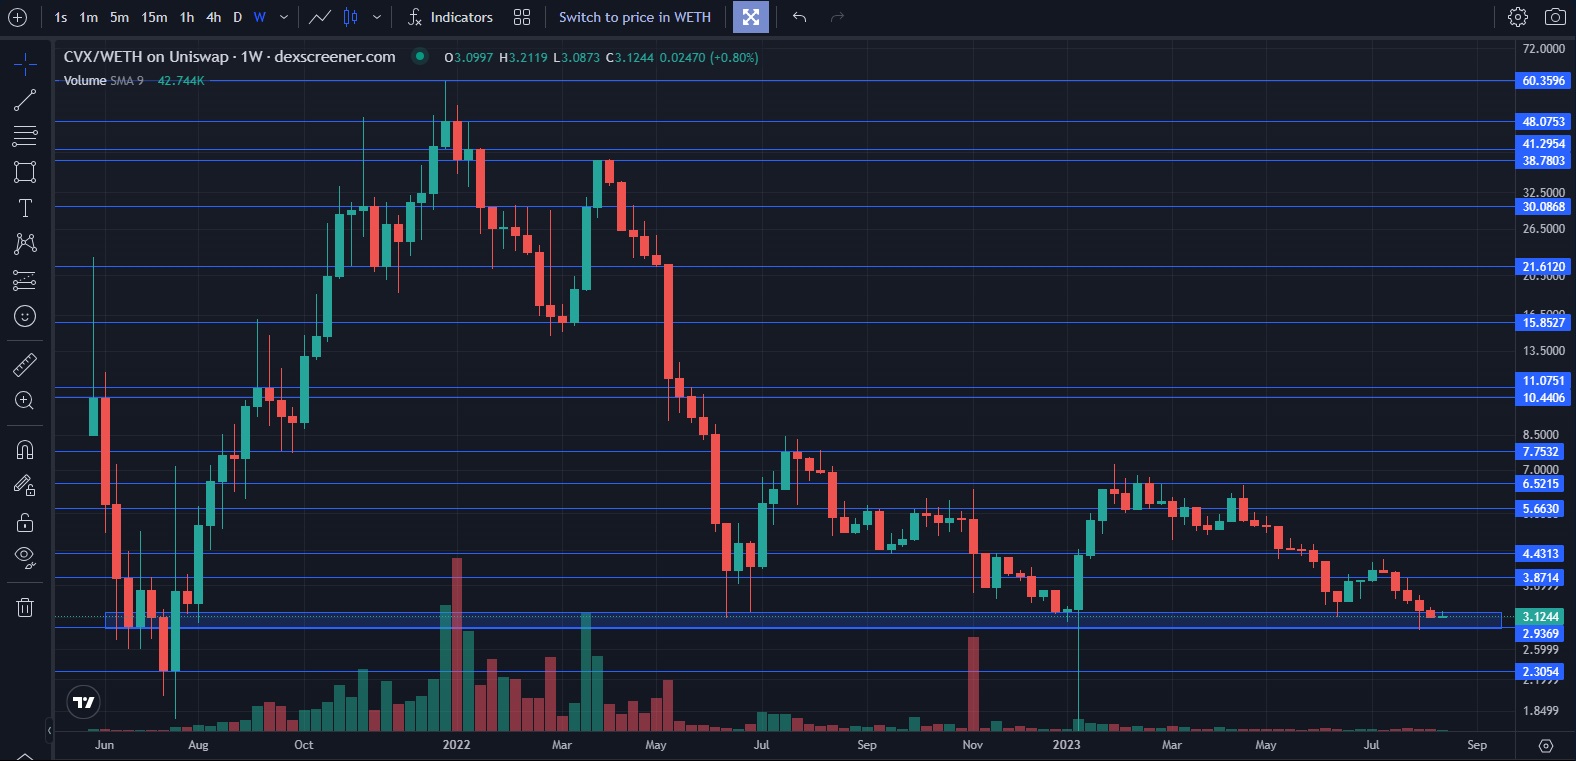 Weekly chart and TA analysis for the CVX coin price